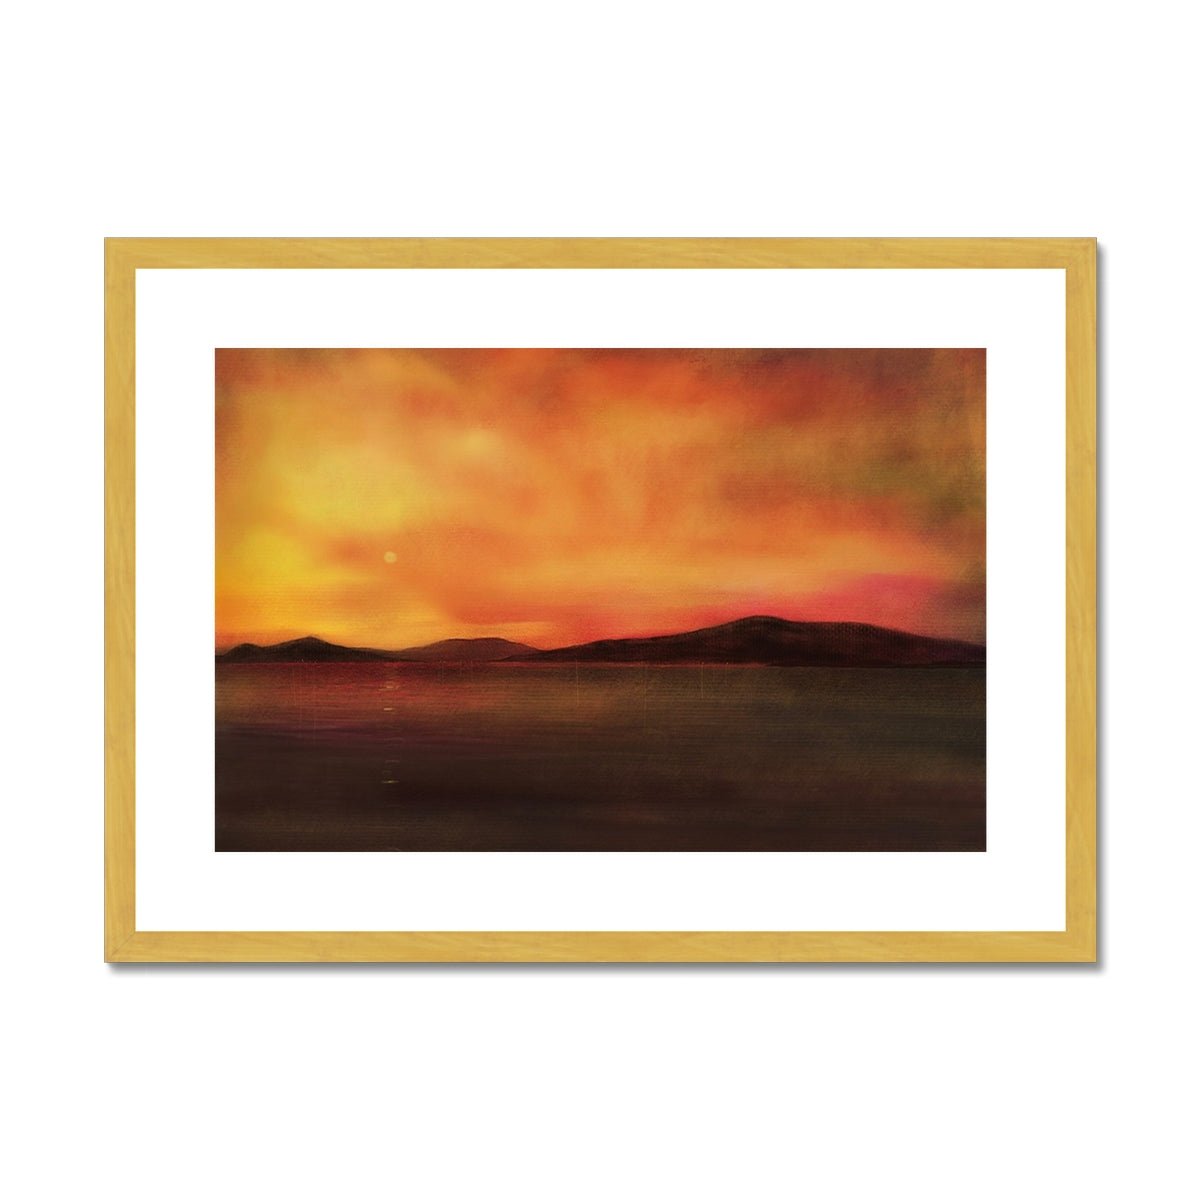 Isle Of Harris Sunset Painting | Antique Framed & Mounted Prints From Scotland-Antique Framed & Mounted Prints-Hebridean Islands Art Gallery-A2 Landscape-Gold Frame-Paintings, Prints, Homeware, Art Gifts From Scotland By Scottish Artist Kevin Hunter